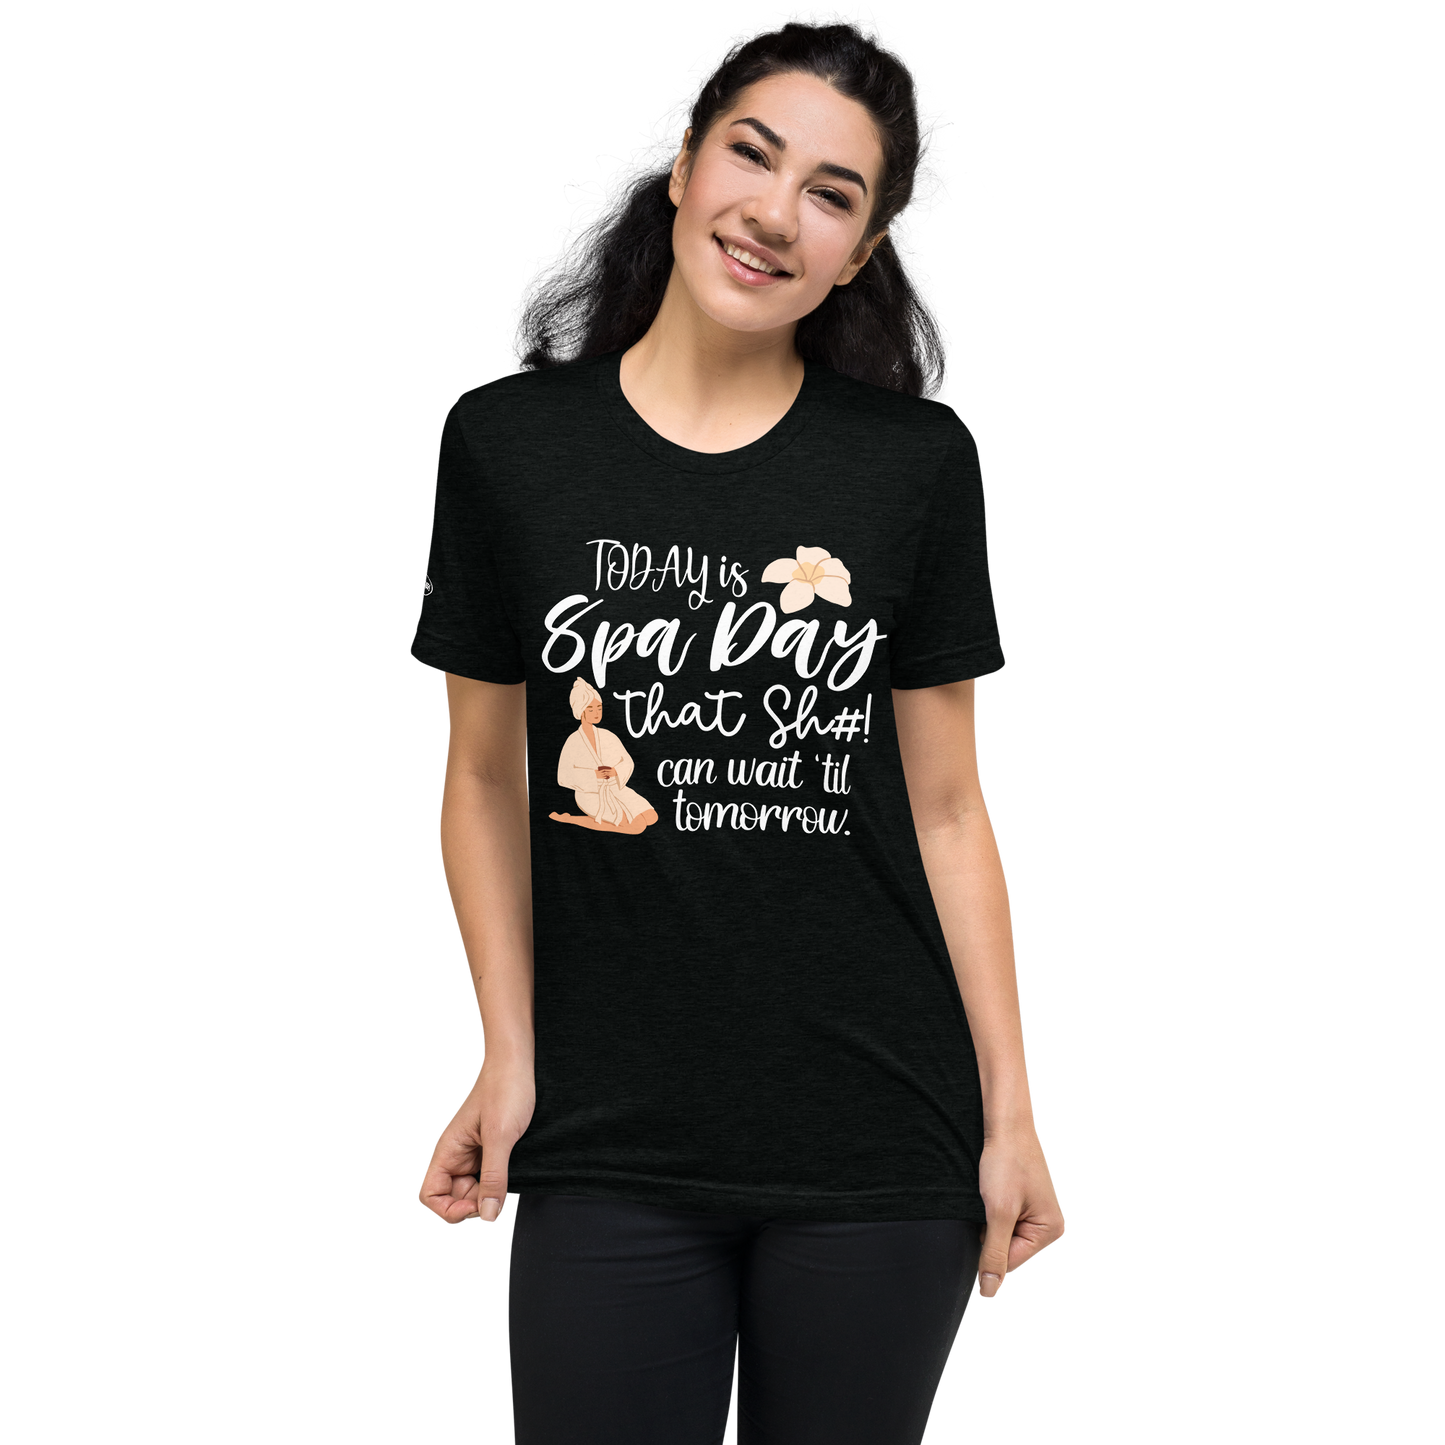 CLASSY - Today is Spa Day. That Sh#t can Wait 'til Tomorrow - Funny T-Shirt